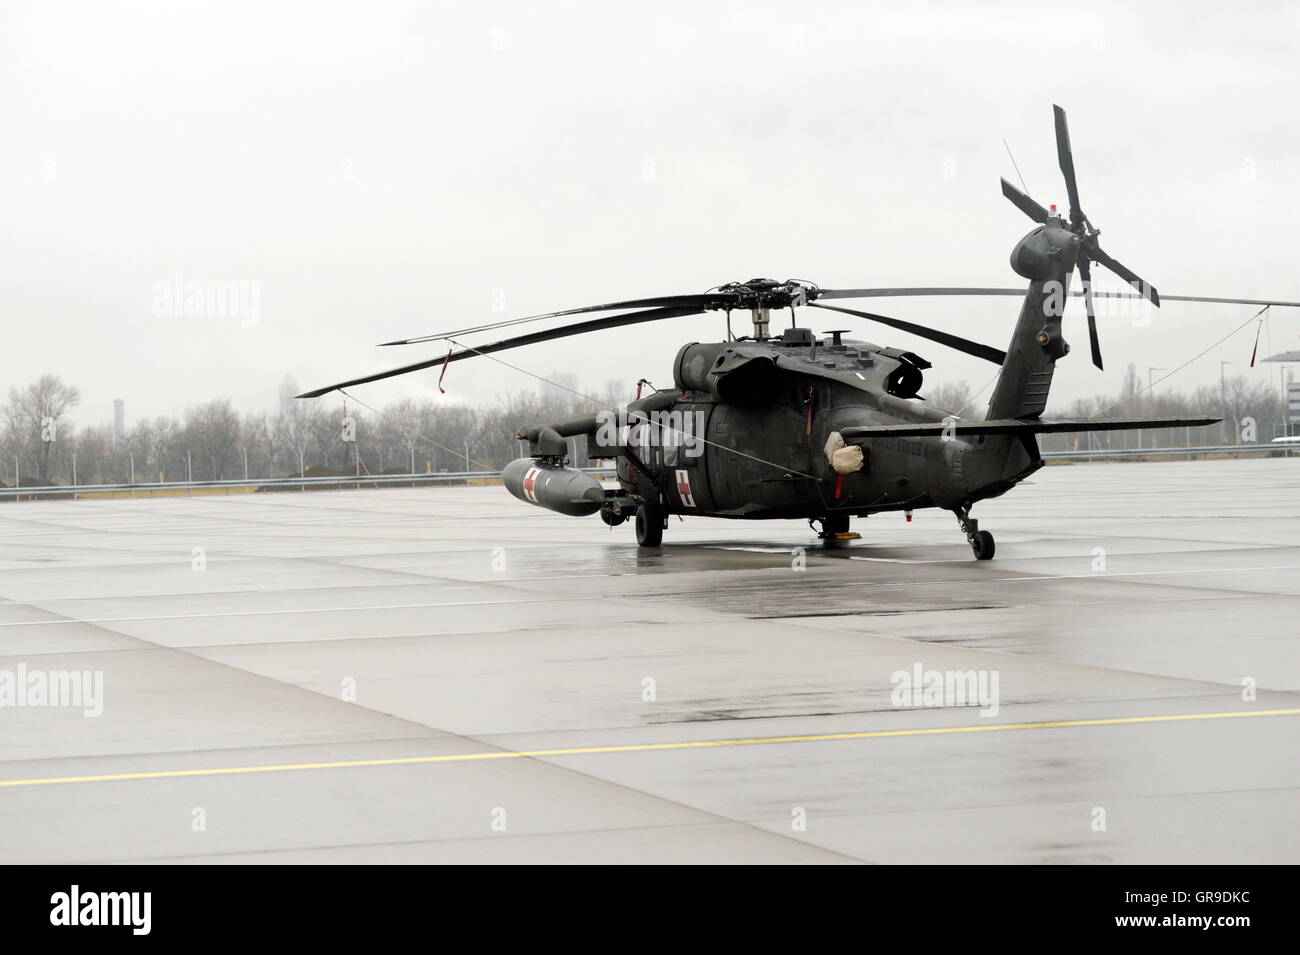 United States Army, Blackhawk Transport Helicopter At Vienna International Airport Stock Photo